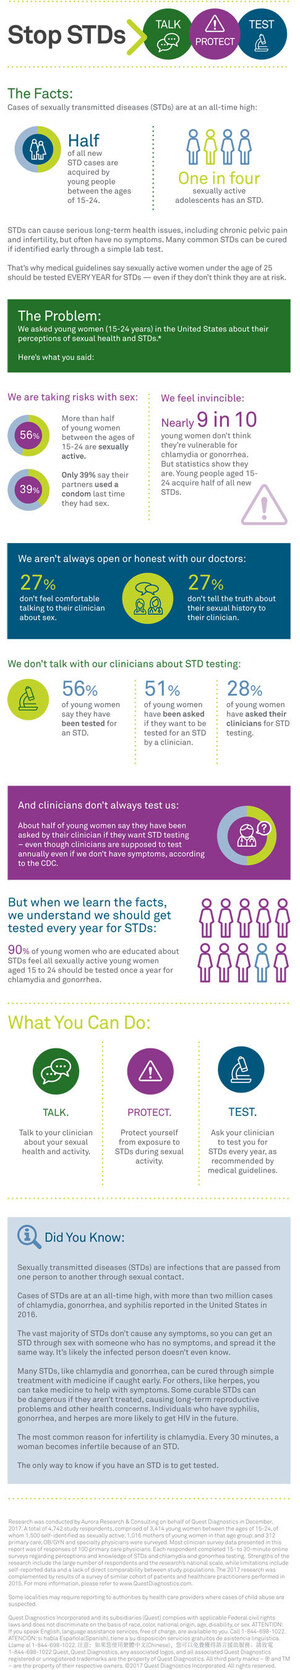 New Survey: False Beliefs about Sexual Risk, Poor Physician-Patient Communication May Impede STD Screening in Young Women